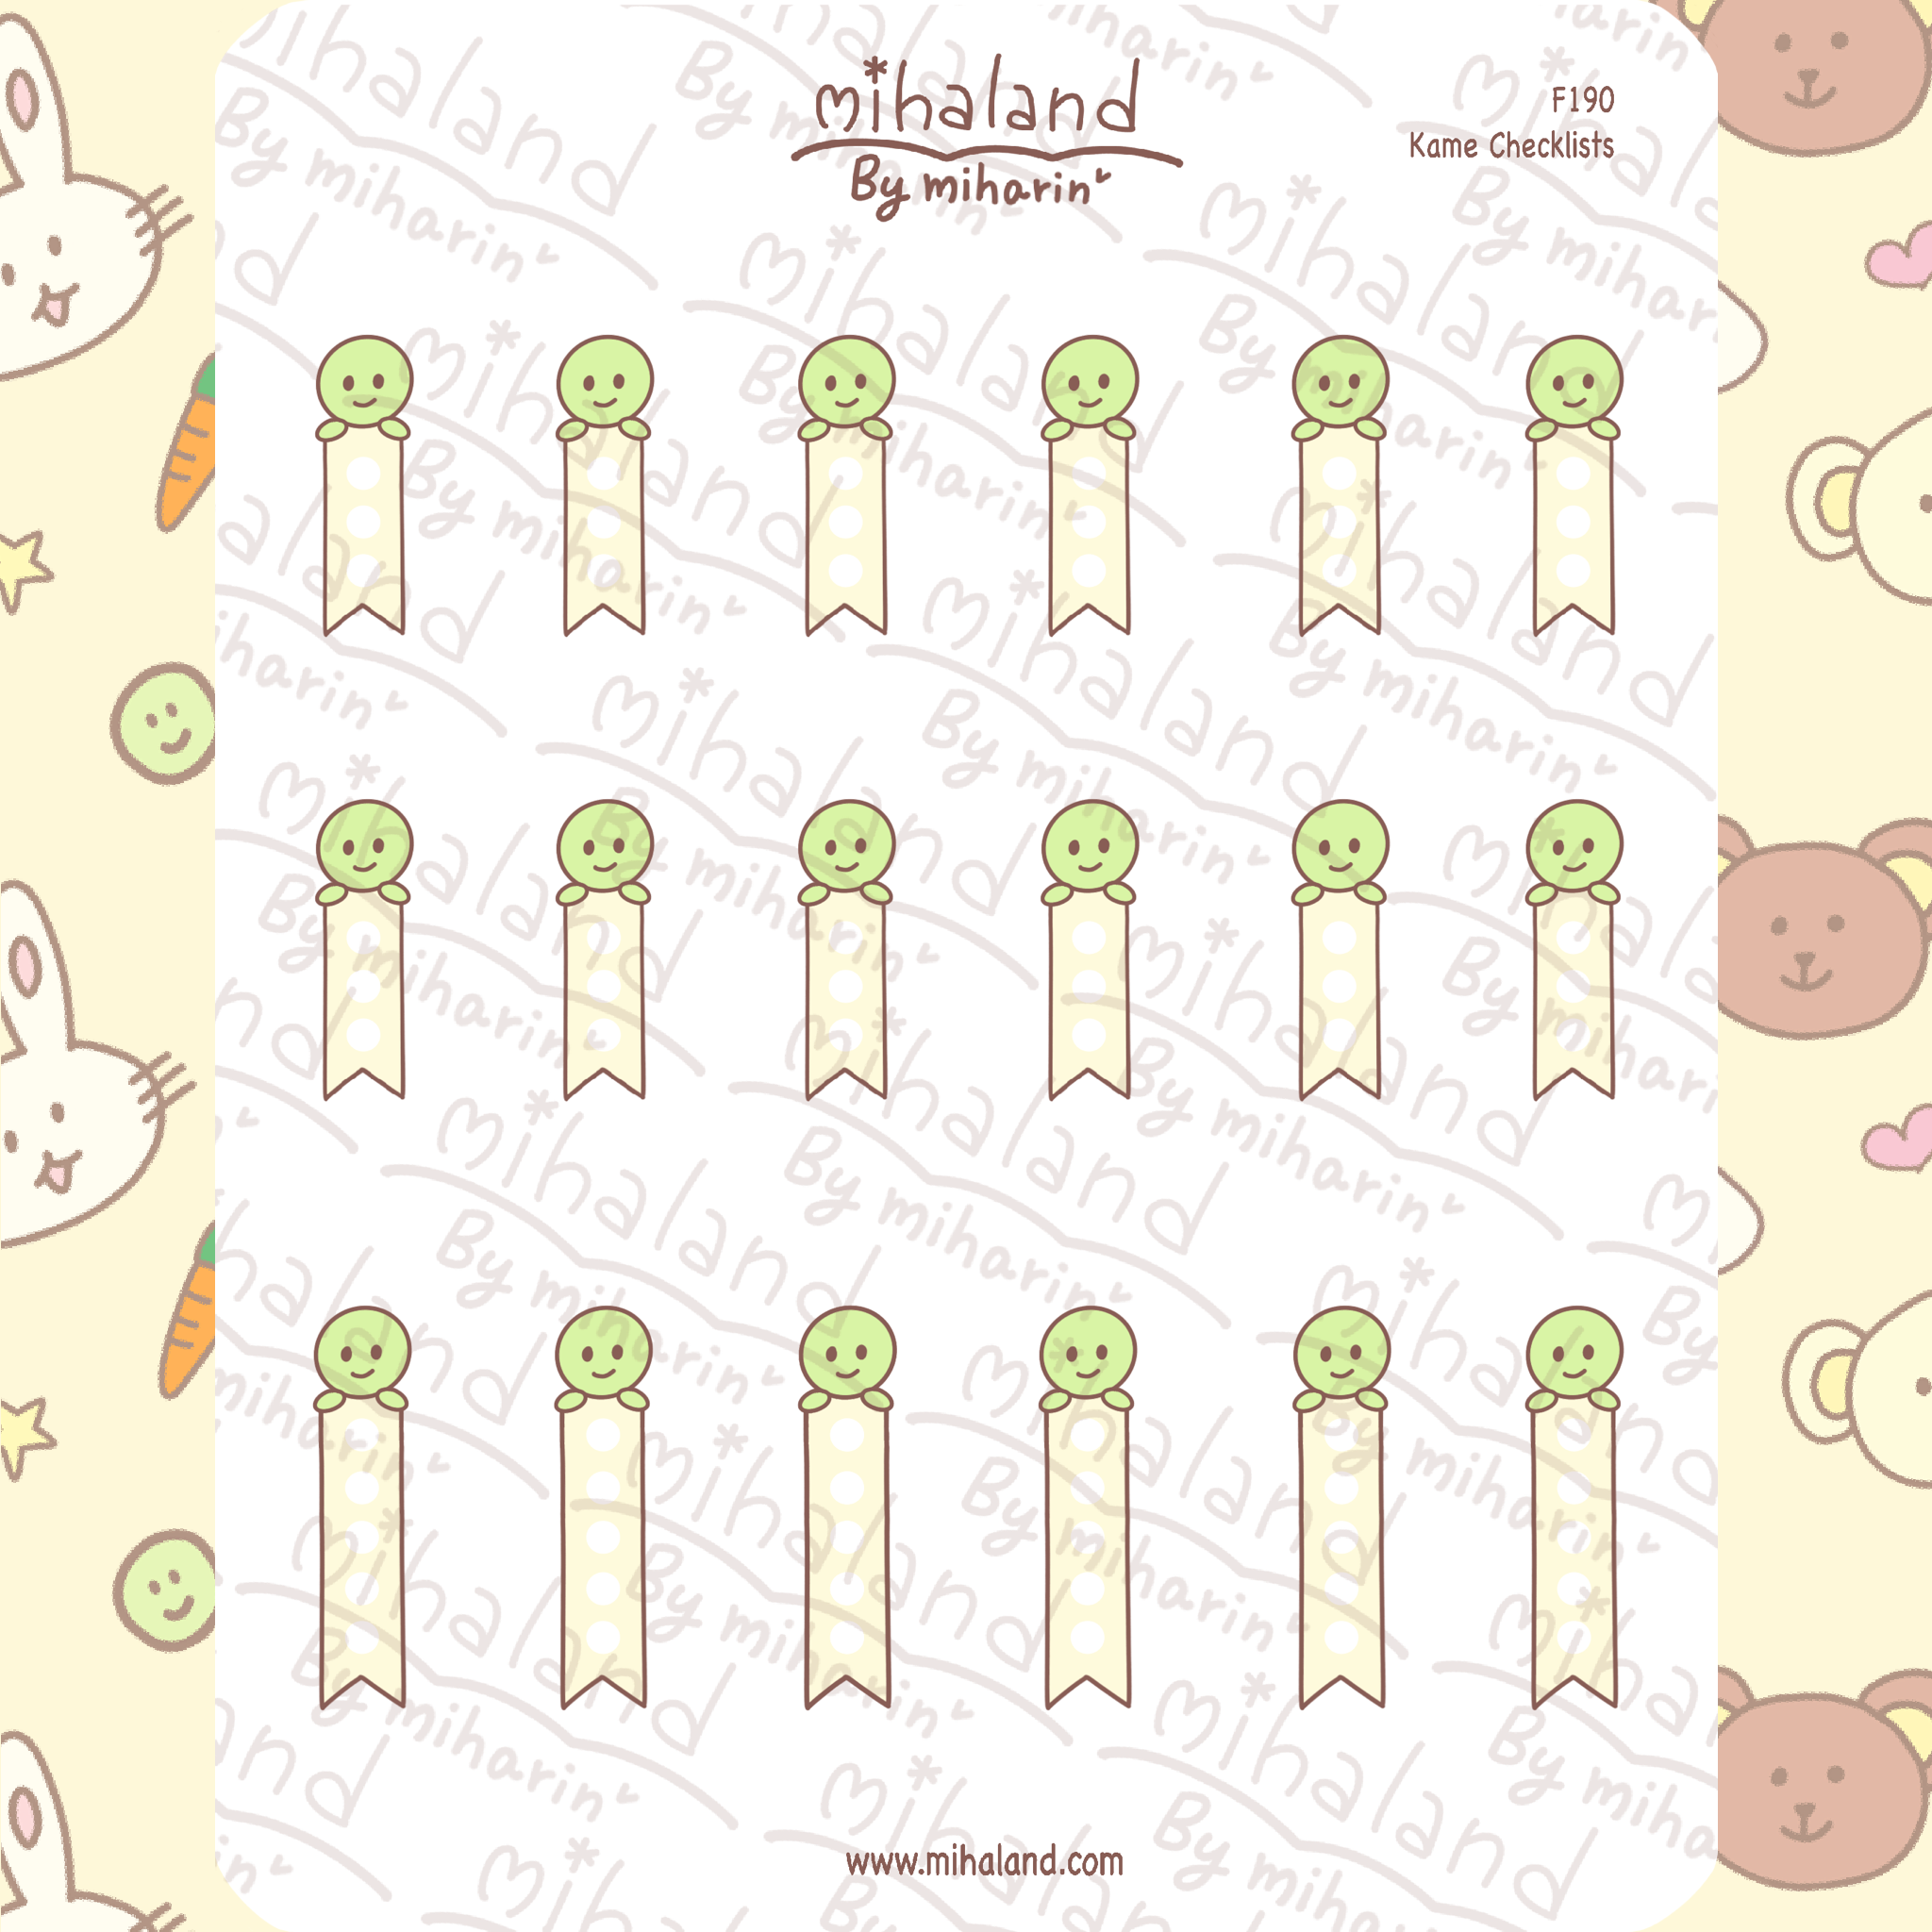 Kame Checklists Planner Stickers (F190)